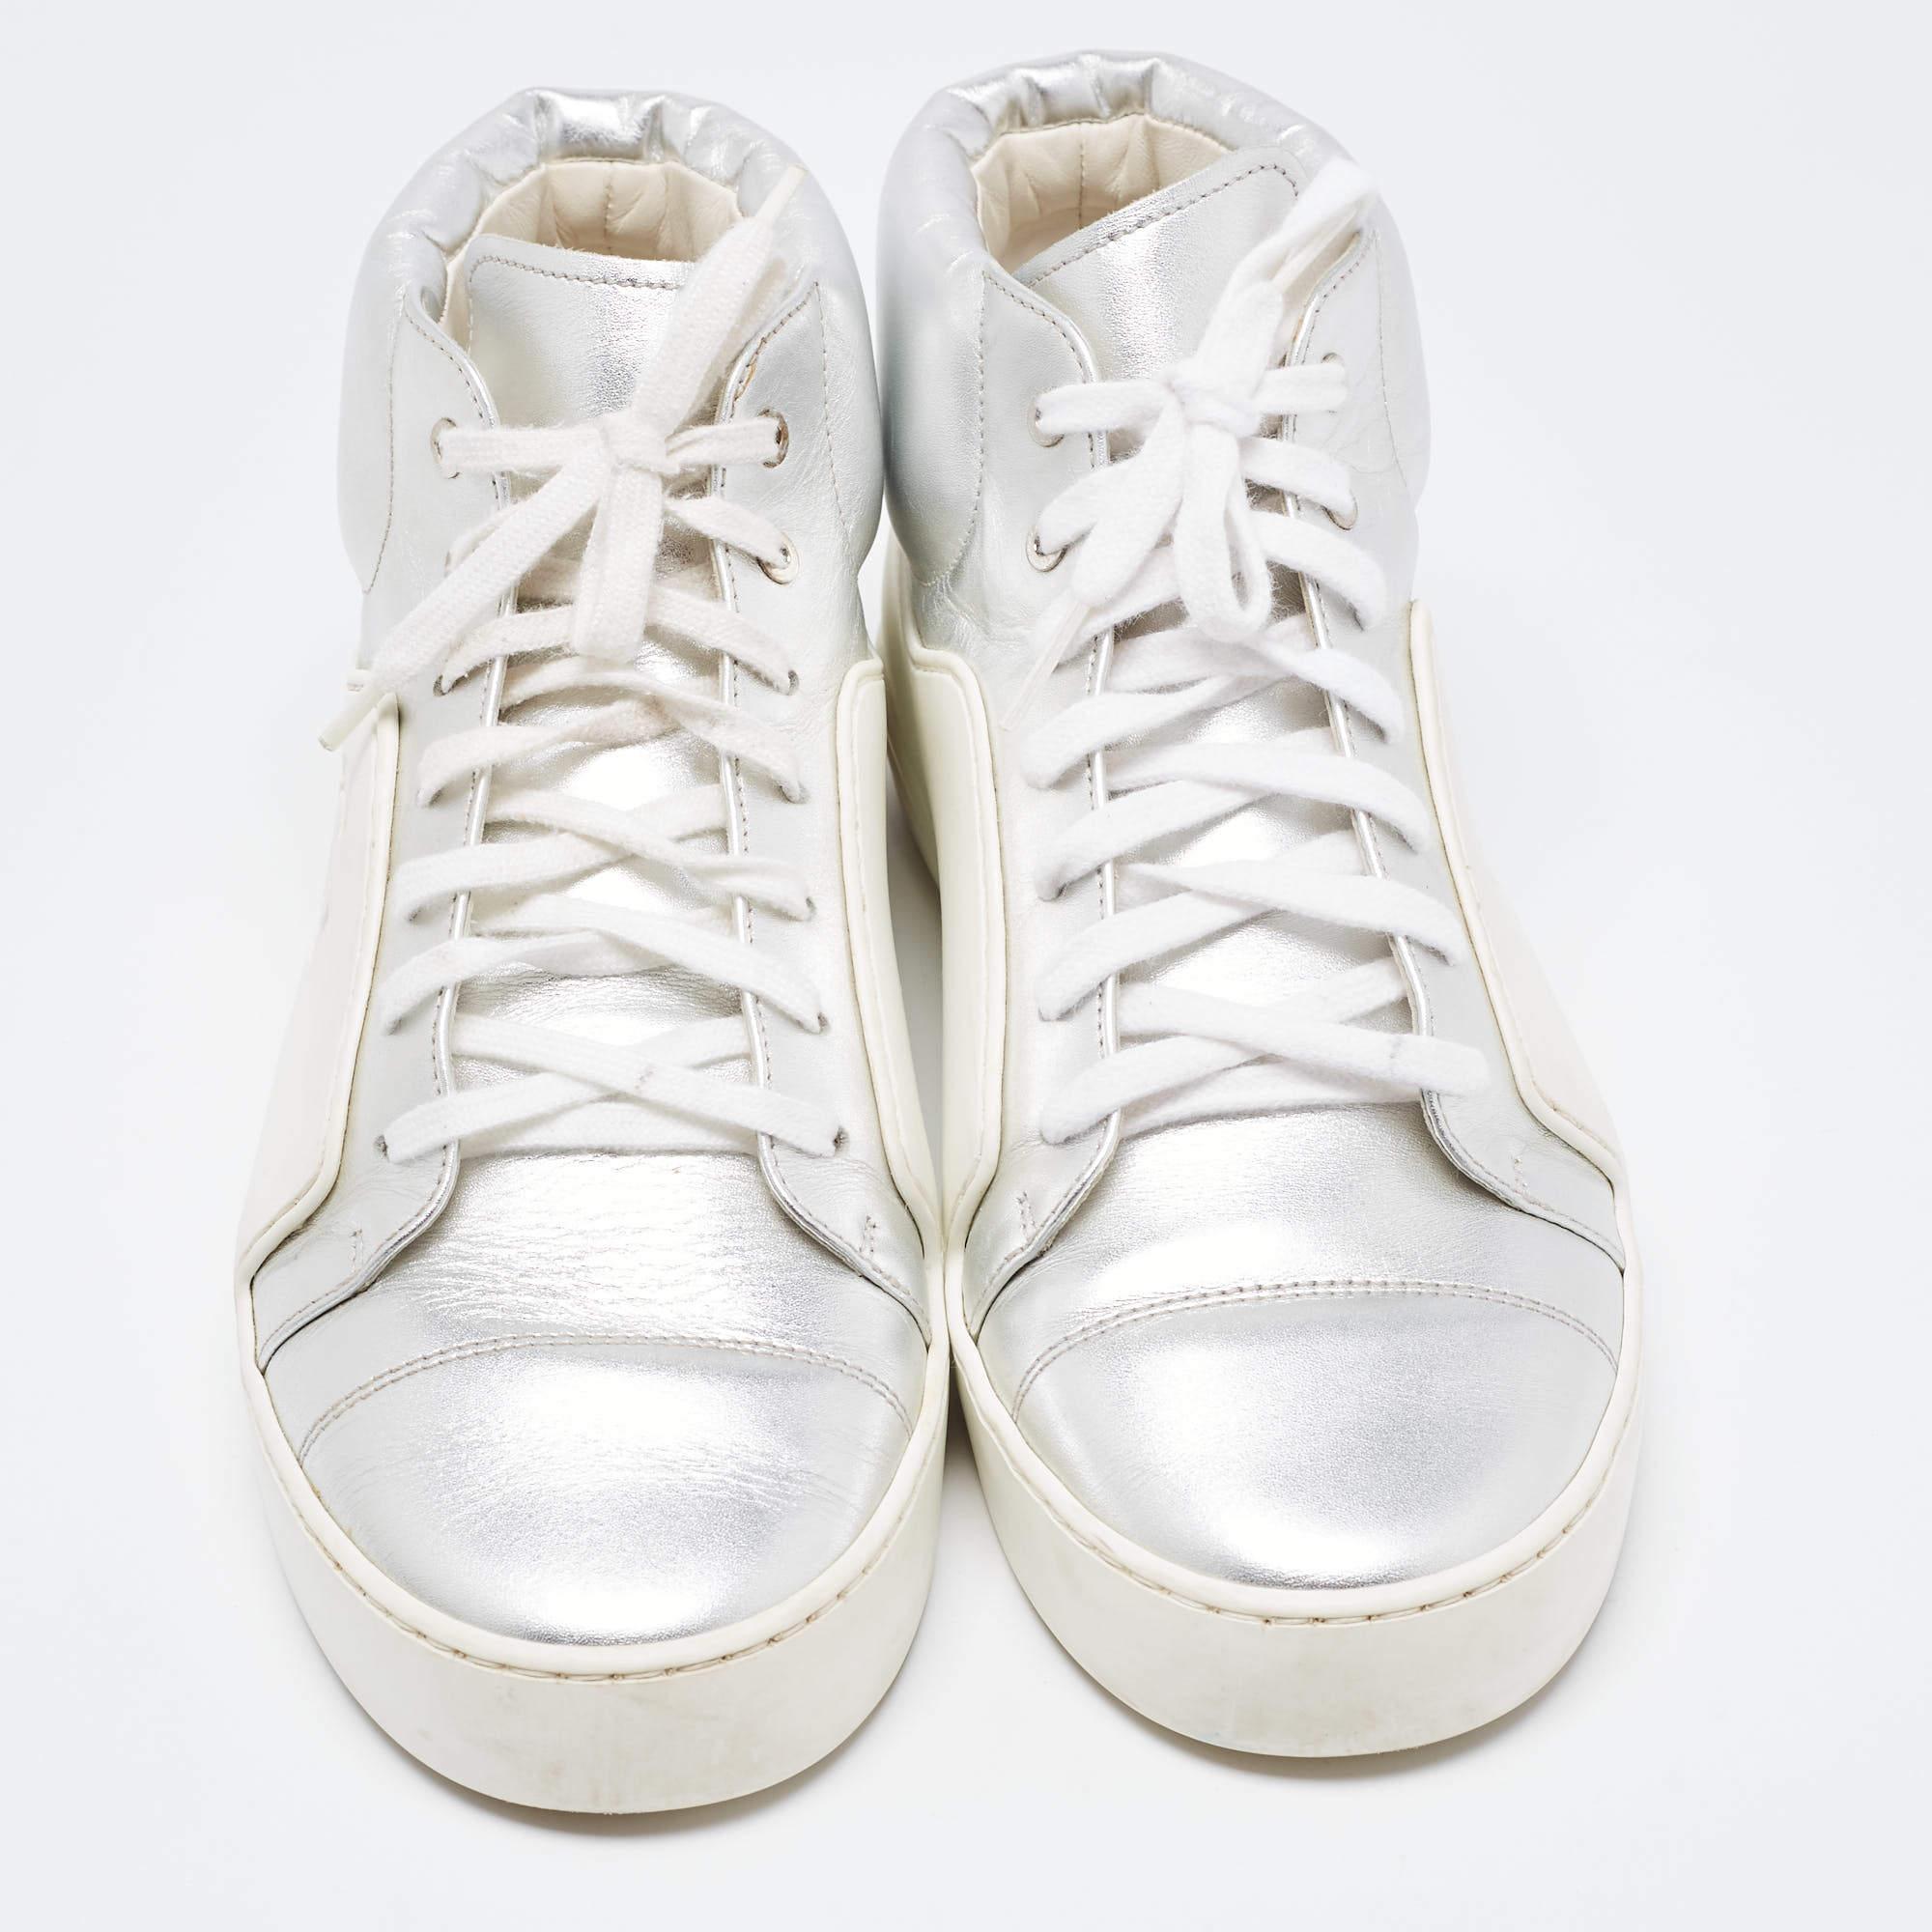 Chanel Metallic Silver/White Leather And Rubber Lace Up High Top Sneakers Size 3 In Good Condition For Sale In Dubai, Al Qouz 2